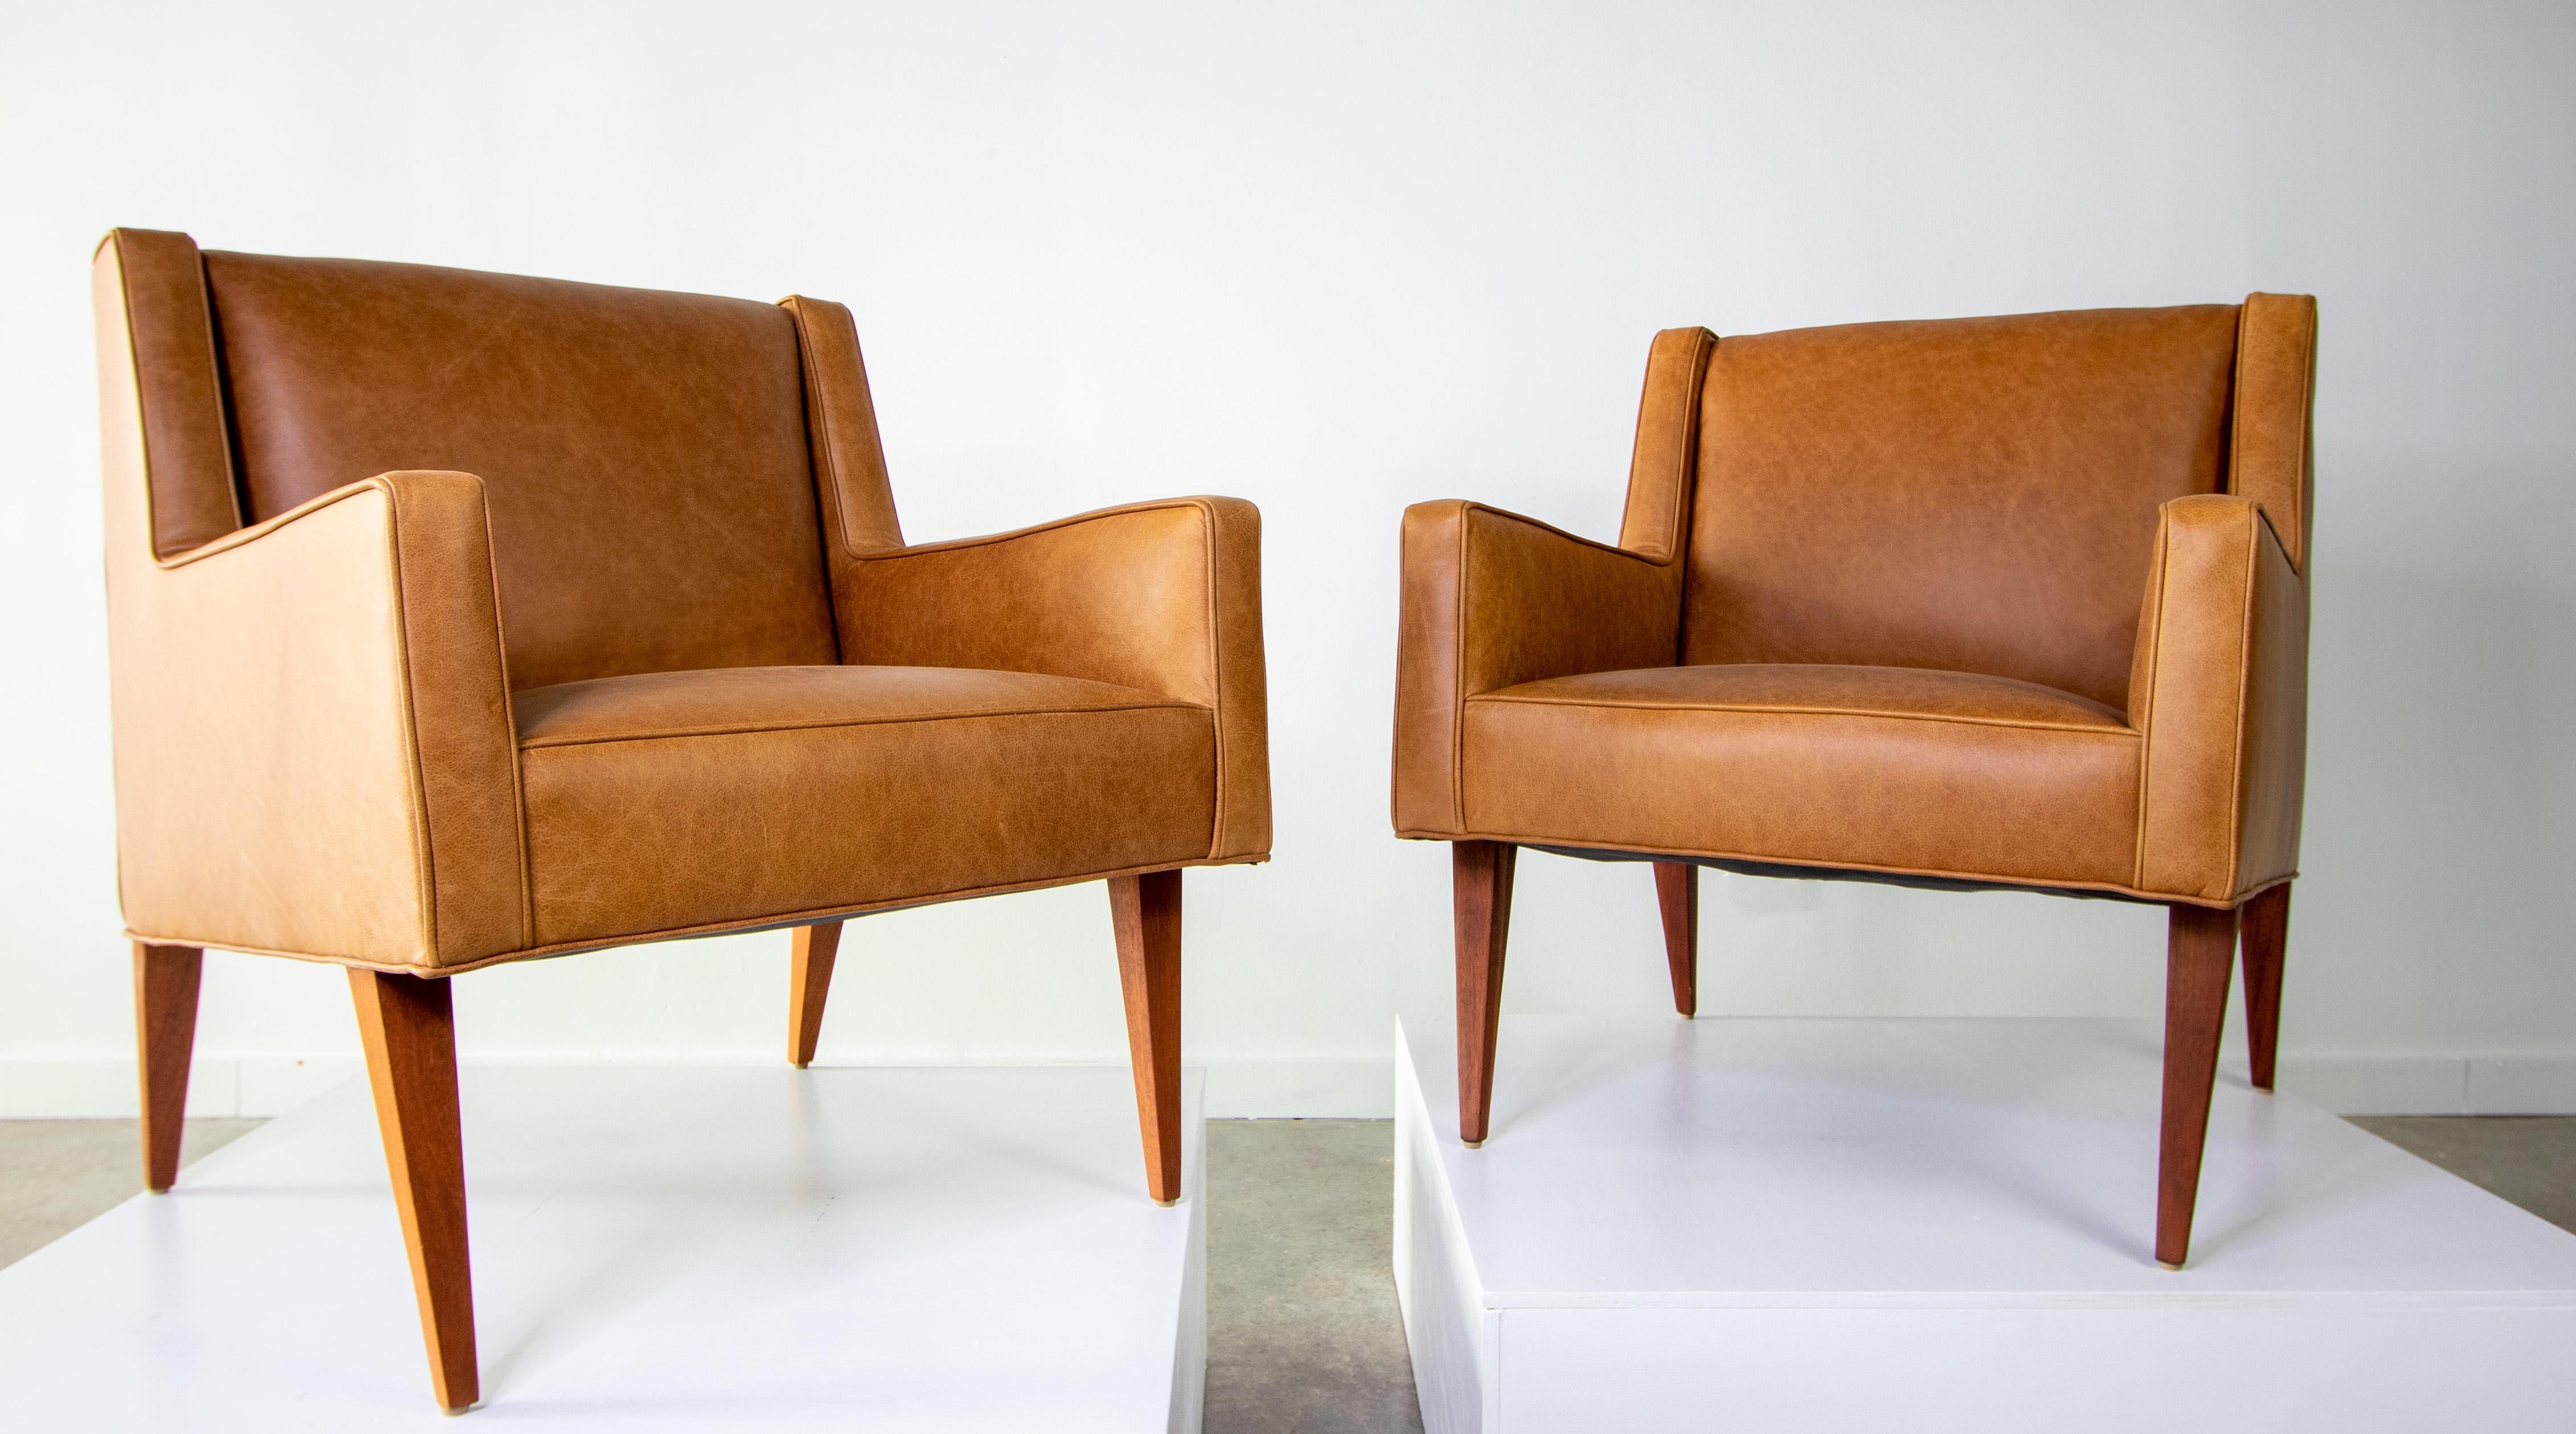 Mid-Century Modern 1950s Edward Wormley for Dunbar pair of leather lounge chairs no. 603 Mrs. Chair For Sale